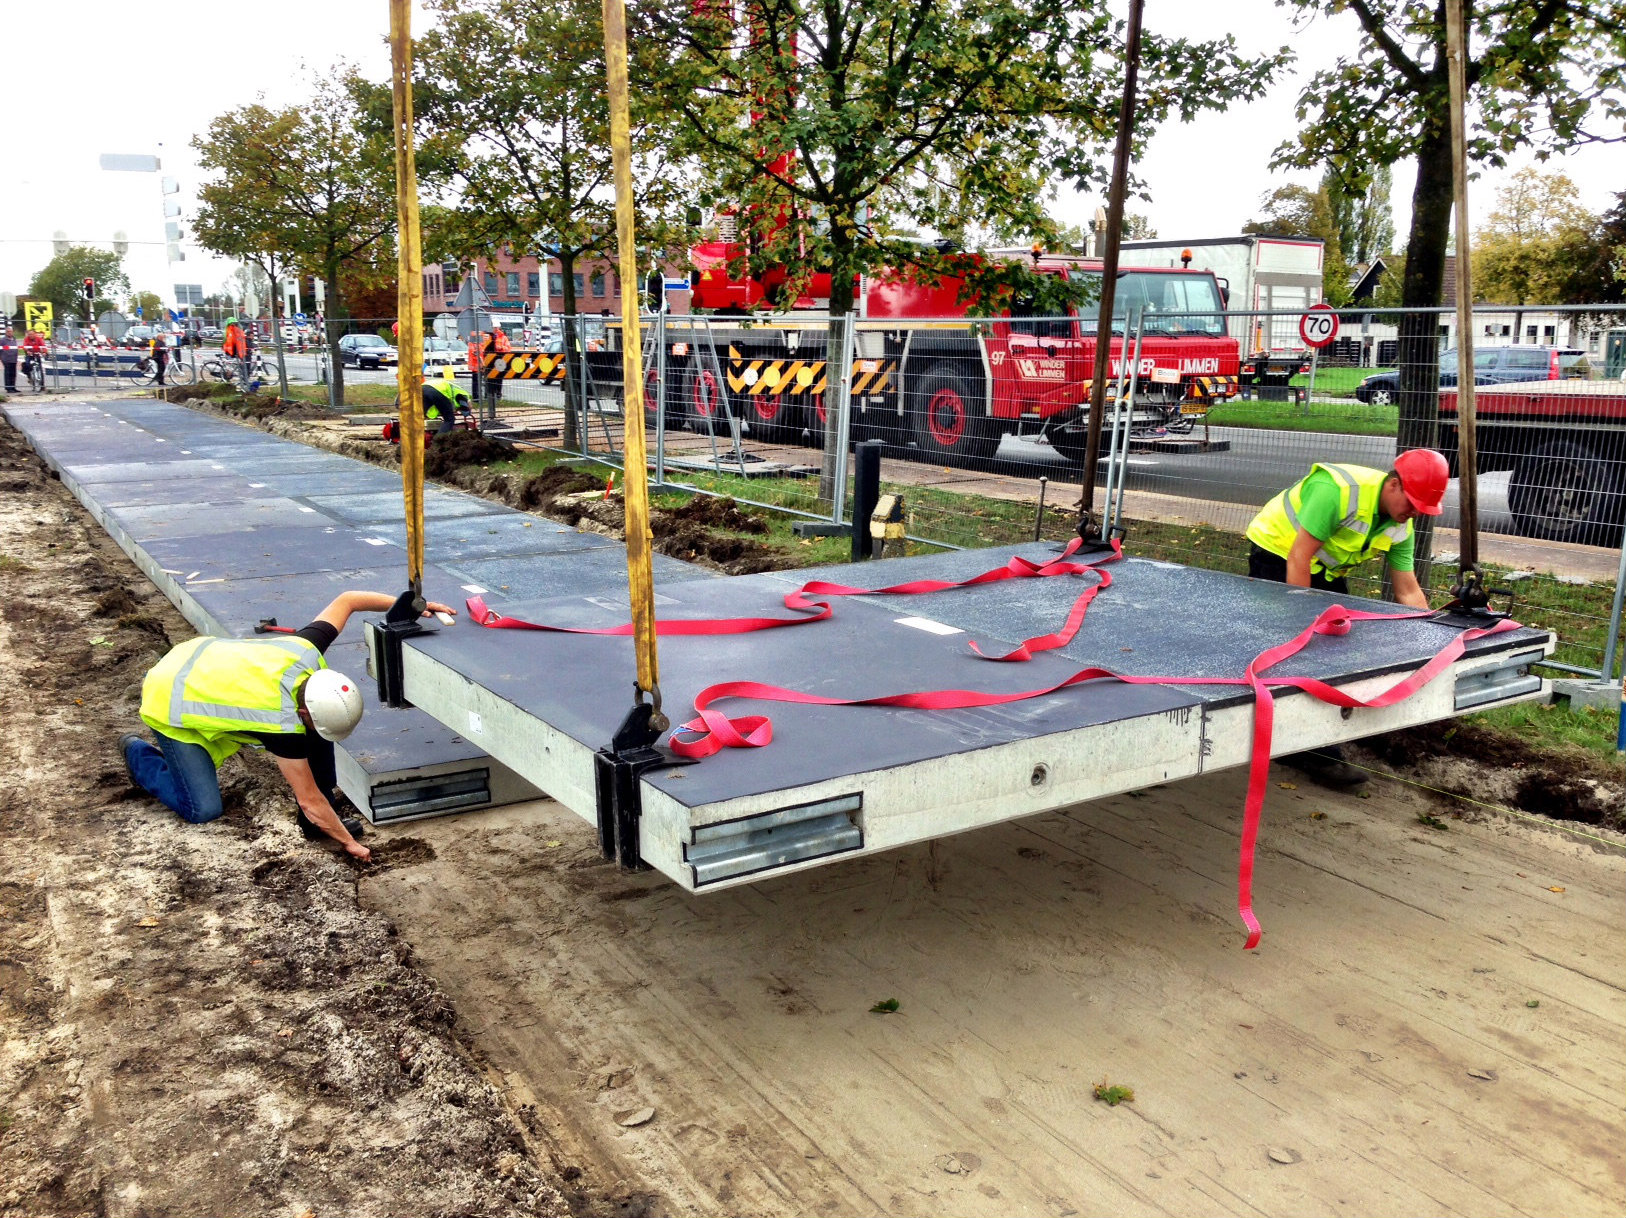 Solar road being installed in Holland